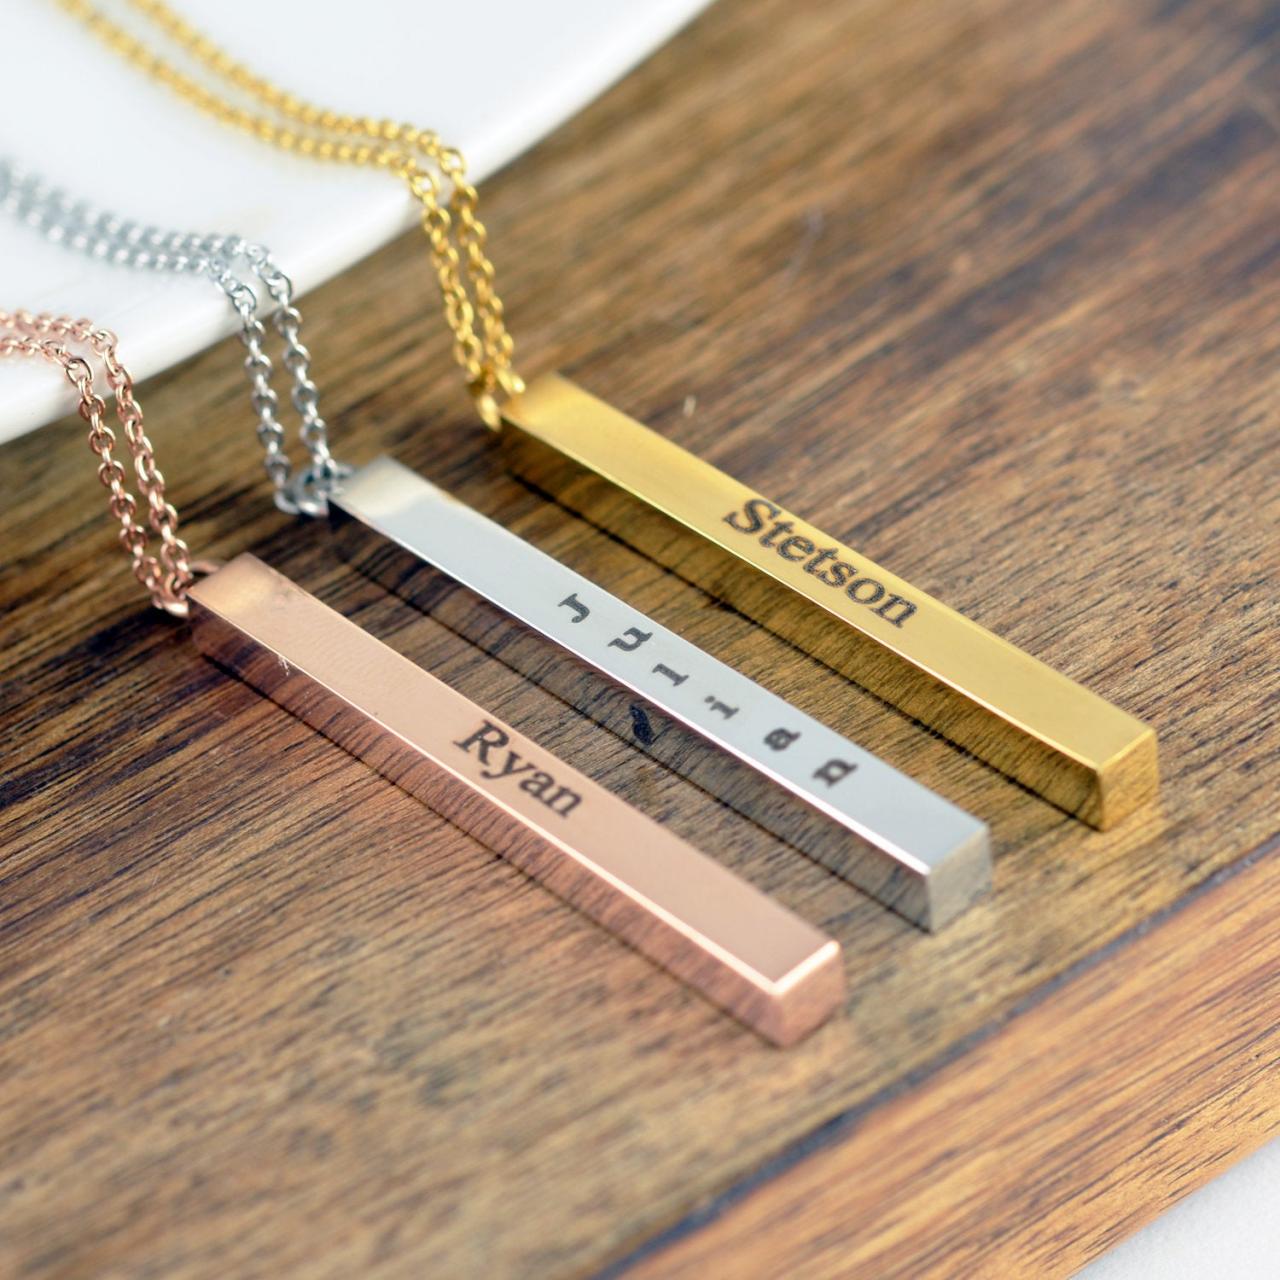 Vertical Bar Necklace, 4 Sided Bar Necklace, Personalized Bar Necklace, Mothers Necklace, Engraved Necklace, Gift For Mother, Mom Jewelry